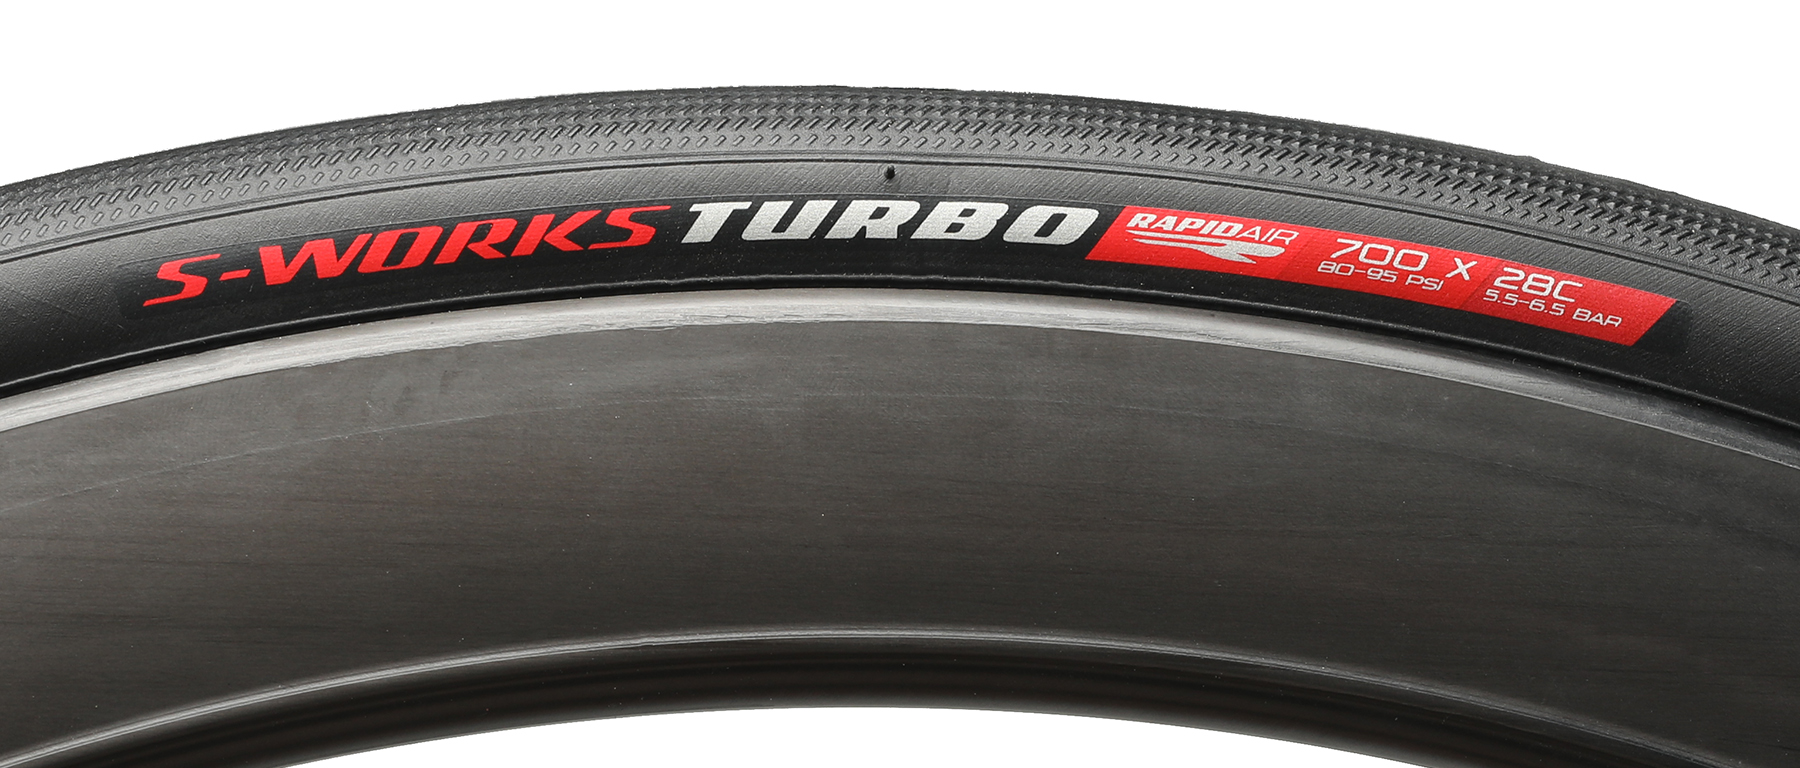 Specialized S-Works Turbo RapidAir 2Bliss Road Tire